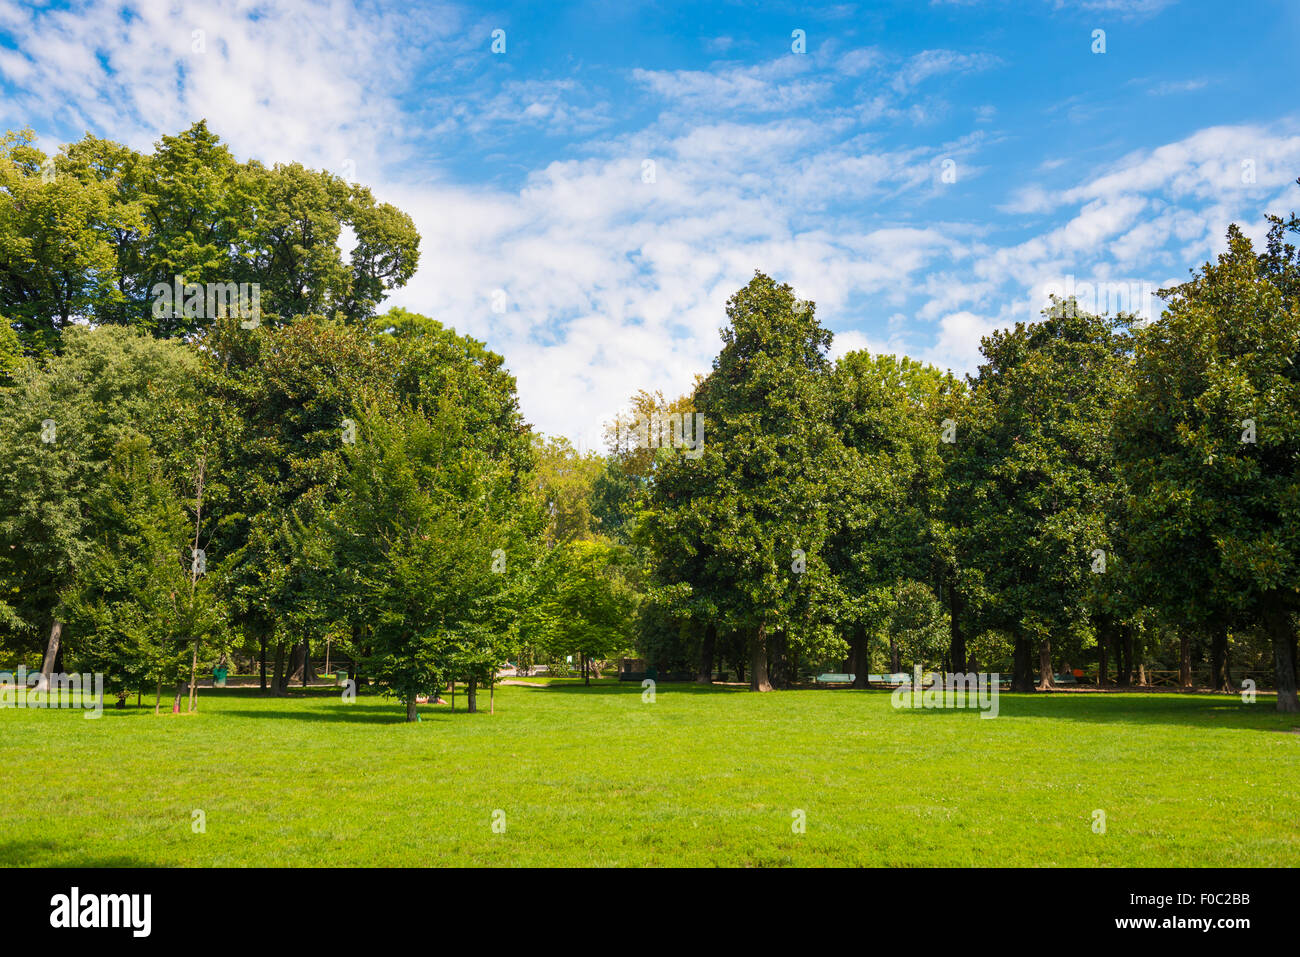 Green lawn with trees in park under sunny light Stock Photo - Alamy